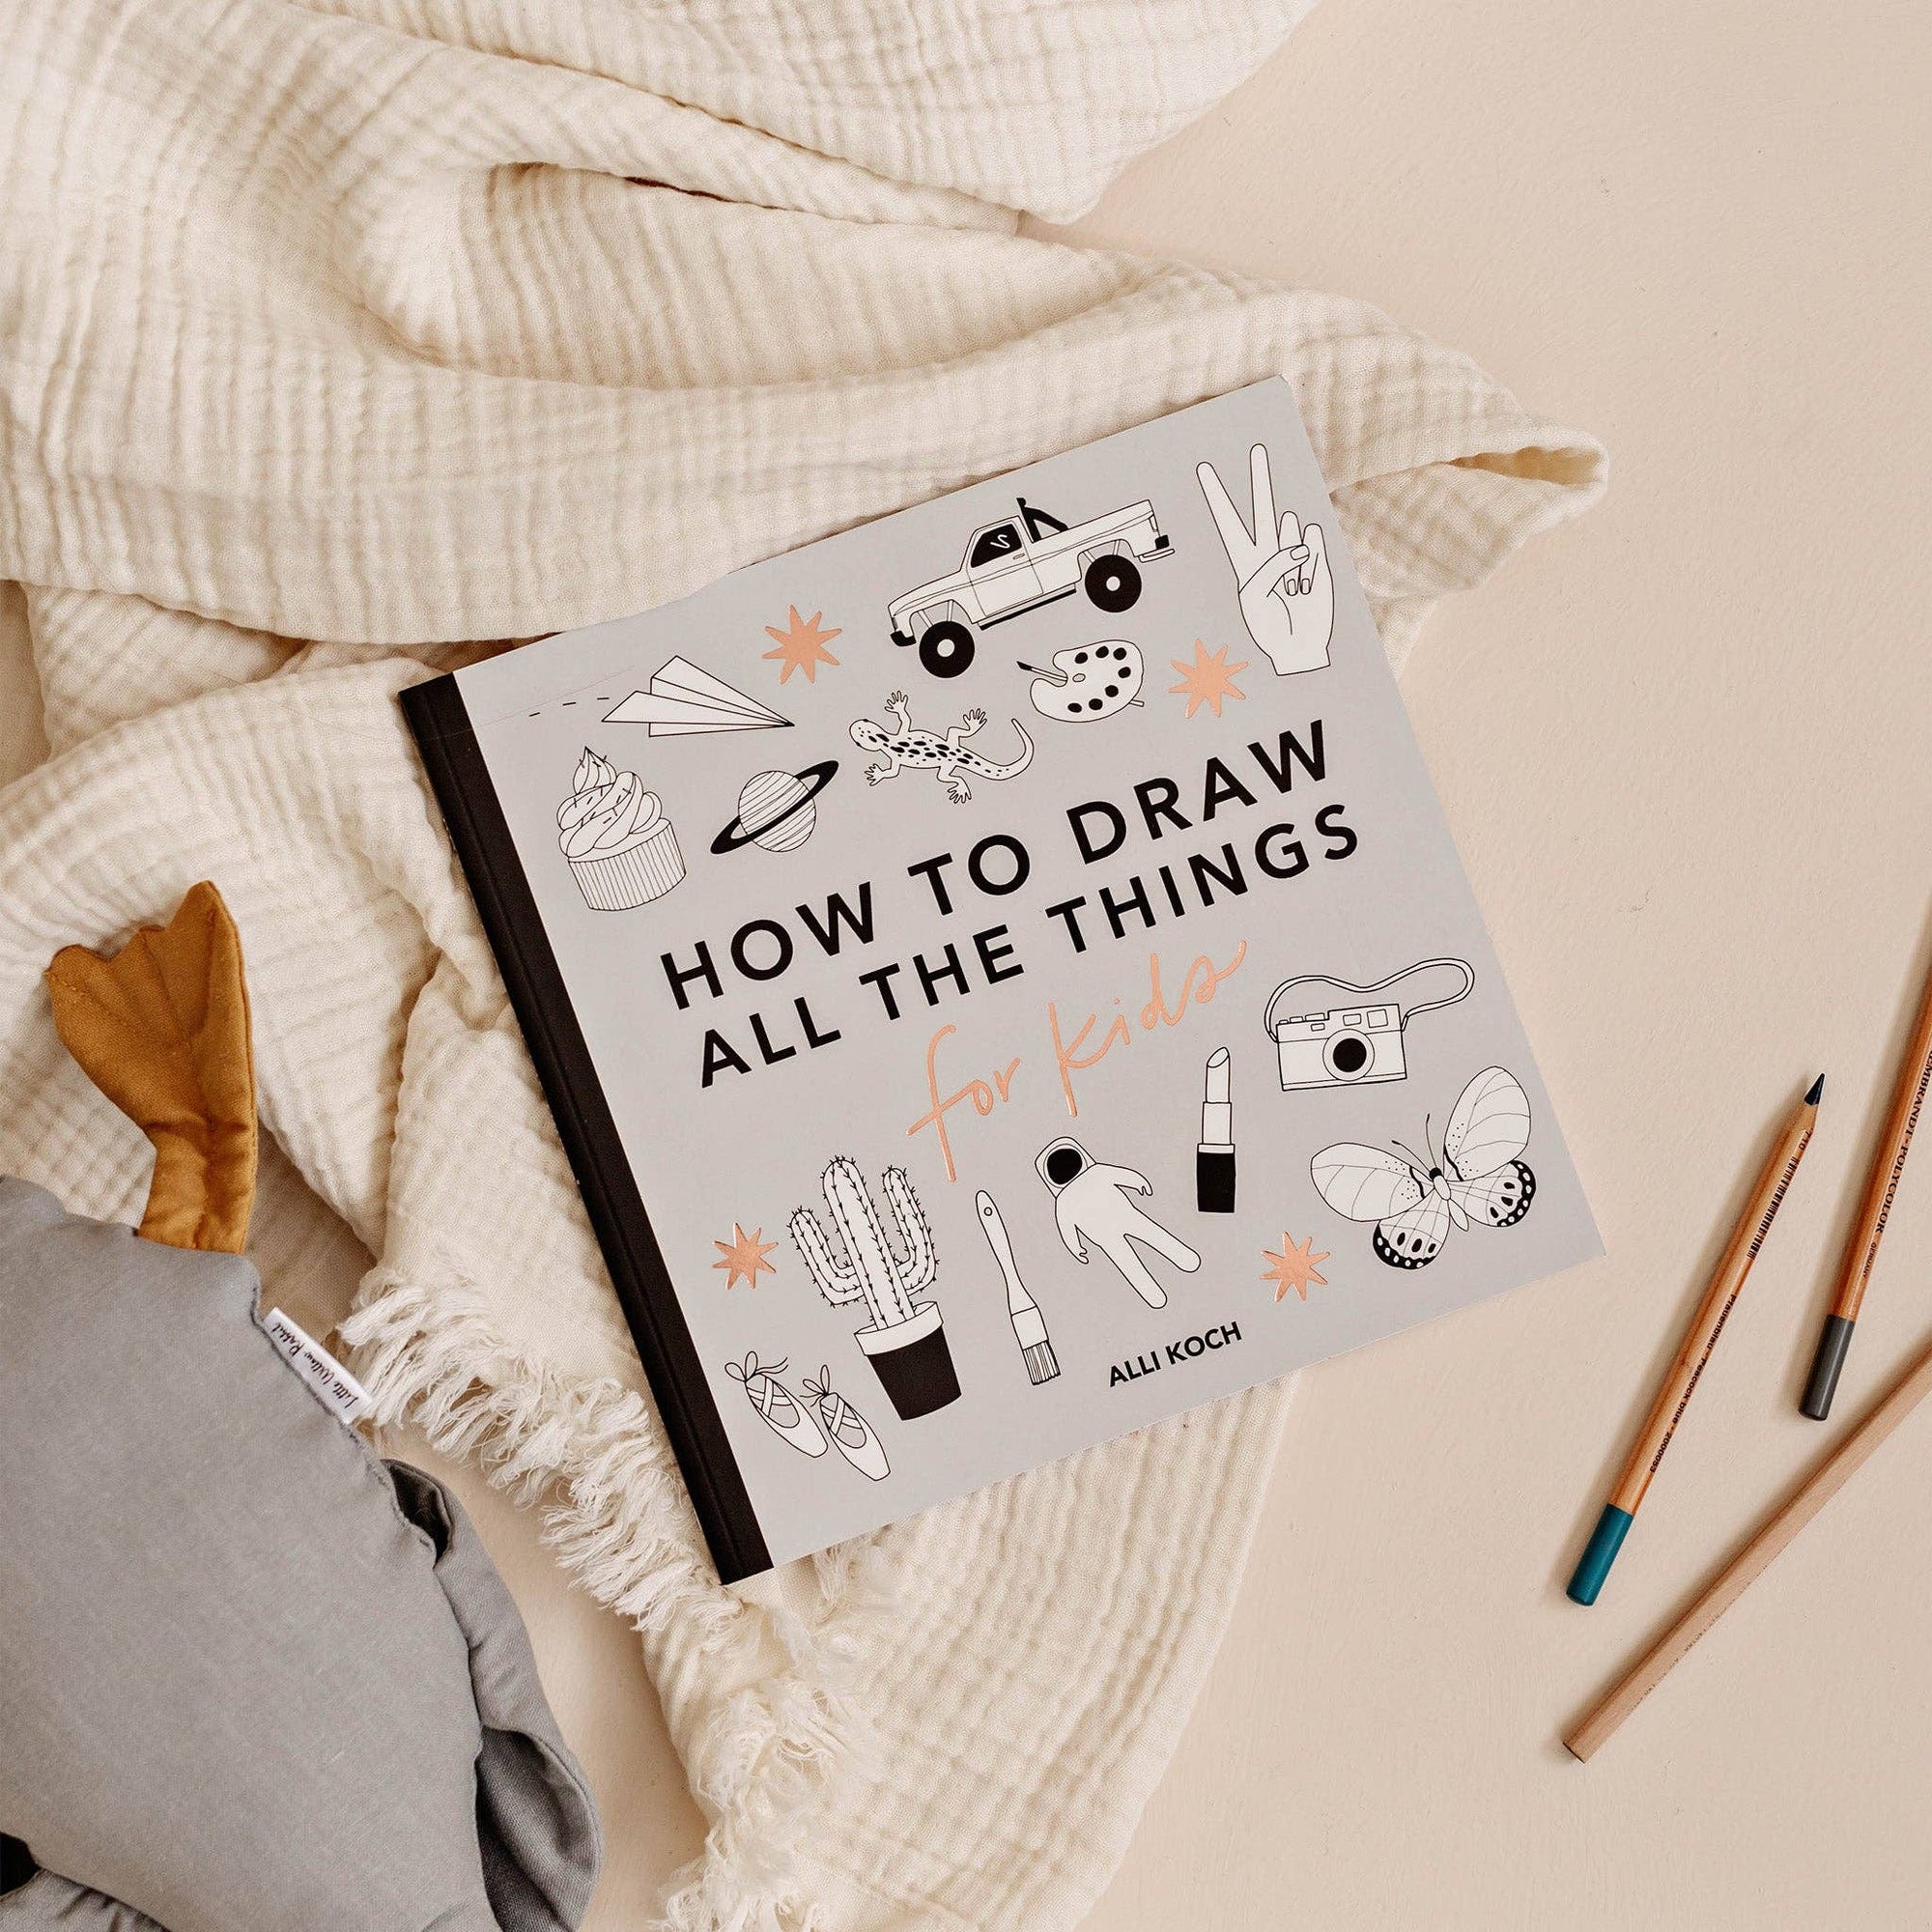 A beginner-friendly guide for children on how to draw All the Things: How to Draw Books for Kids.